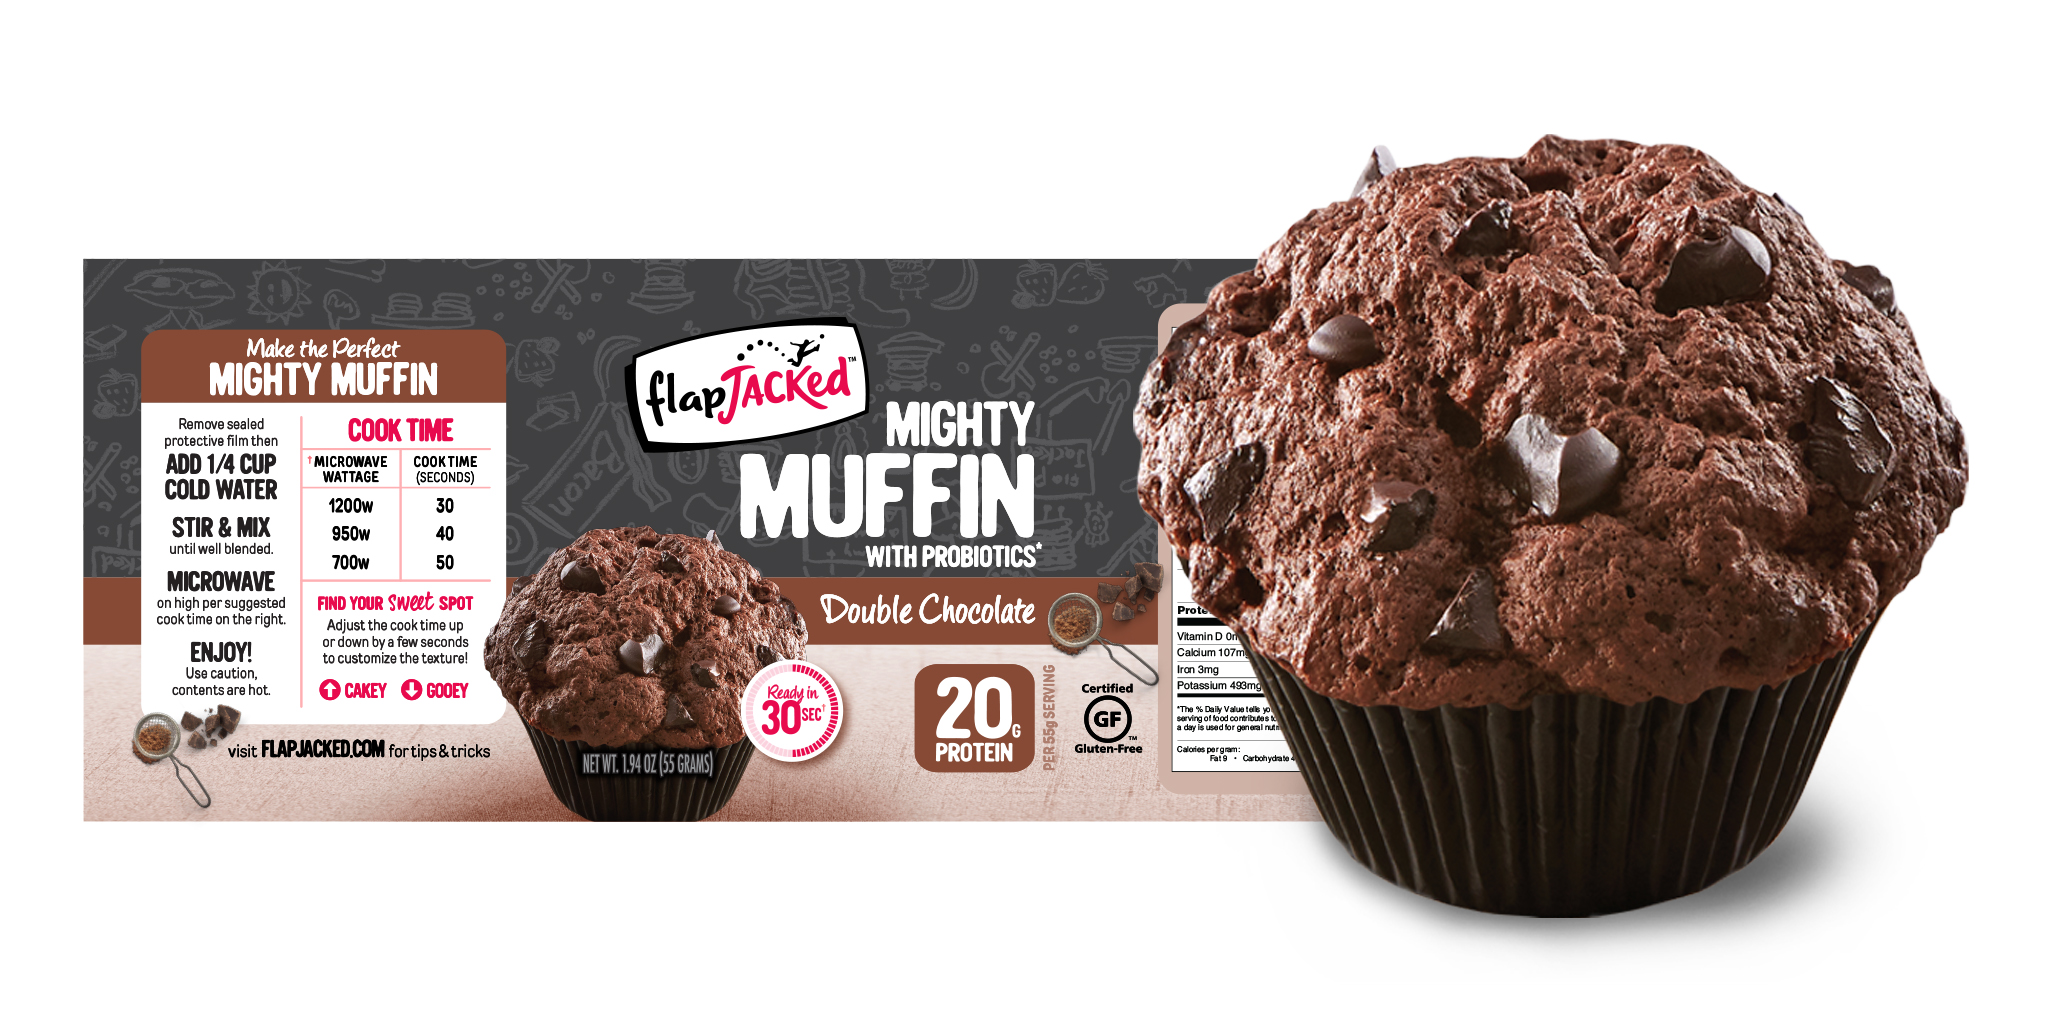 Prepared Mighty Muffin Overlaid on Flat Label